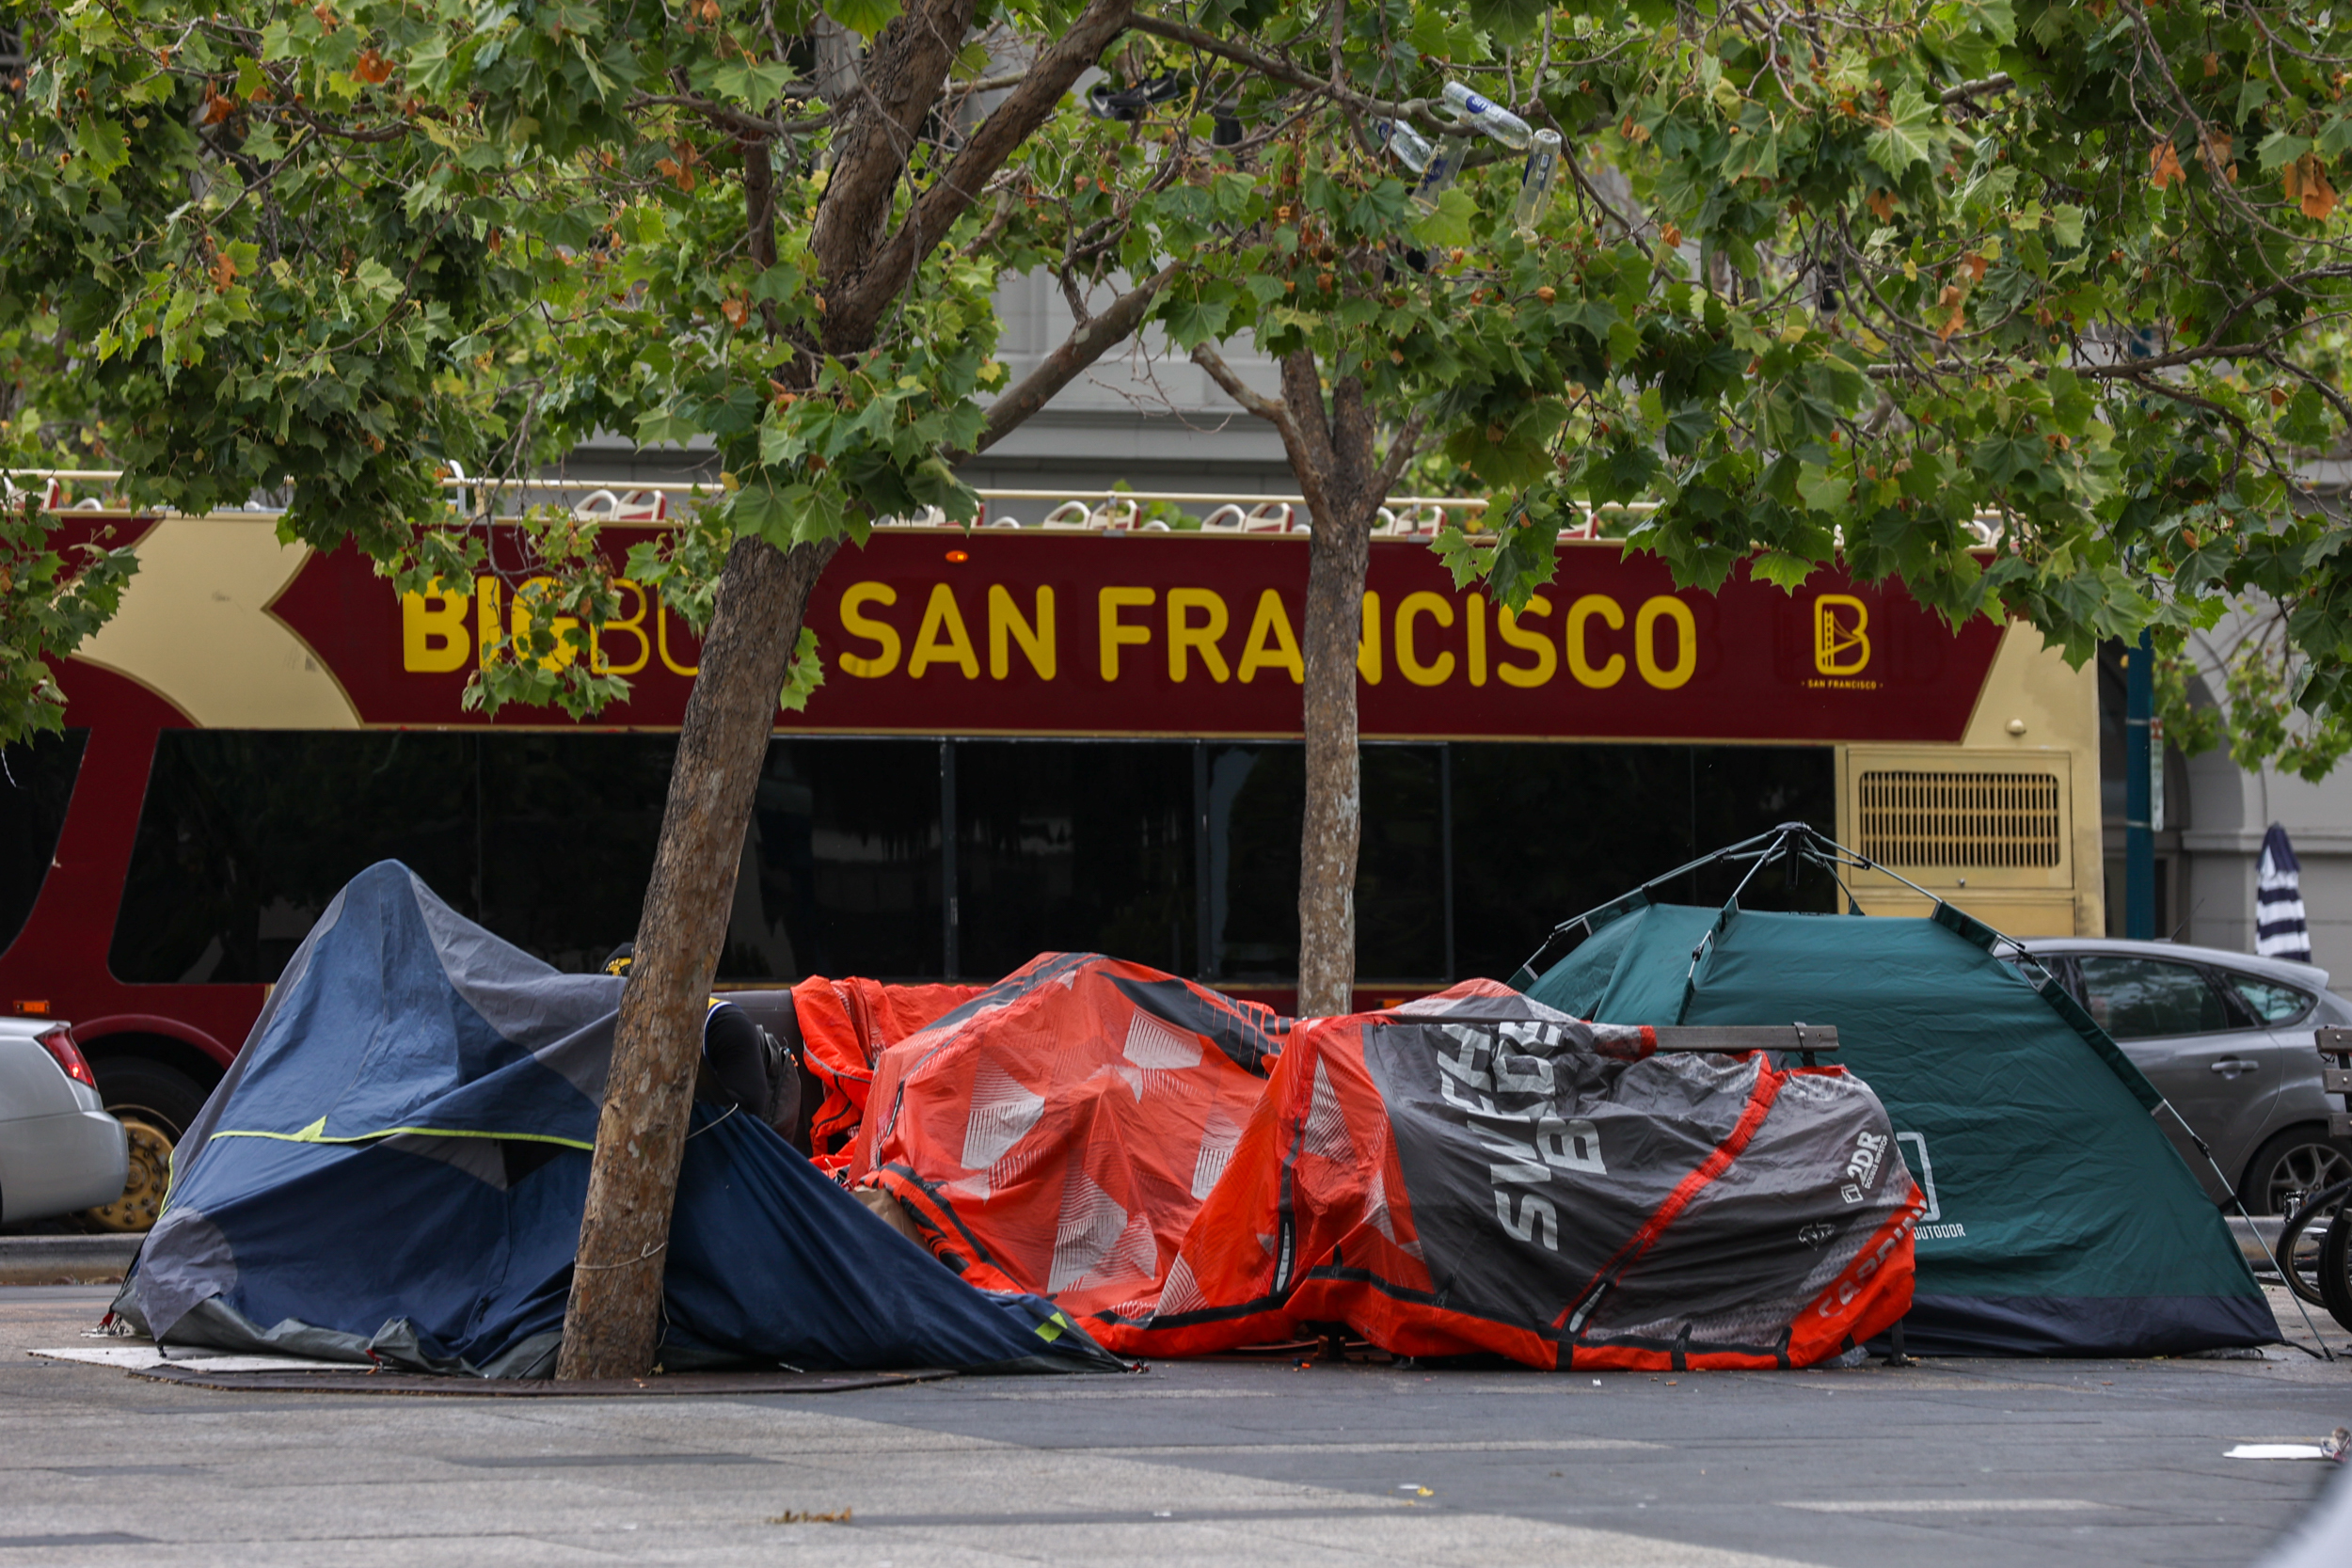 San Francisco Appeals Court Order Banning Homeless Sweeps, Citing ‘Impossible Situation’